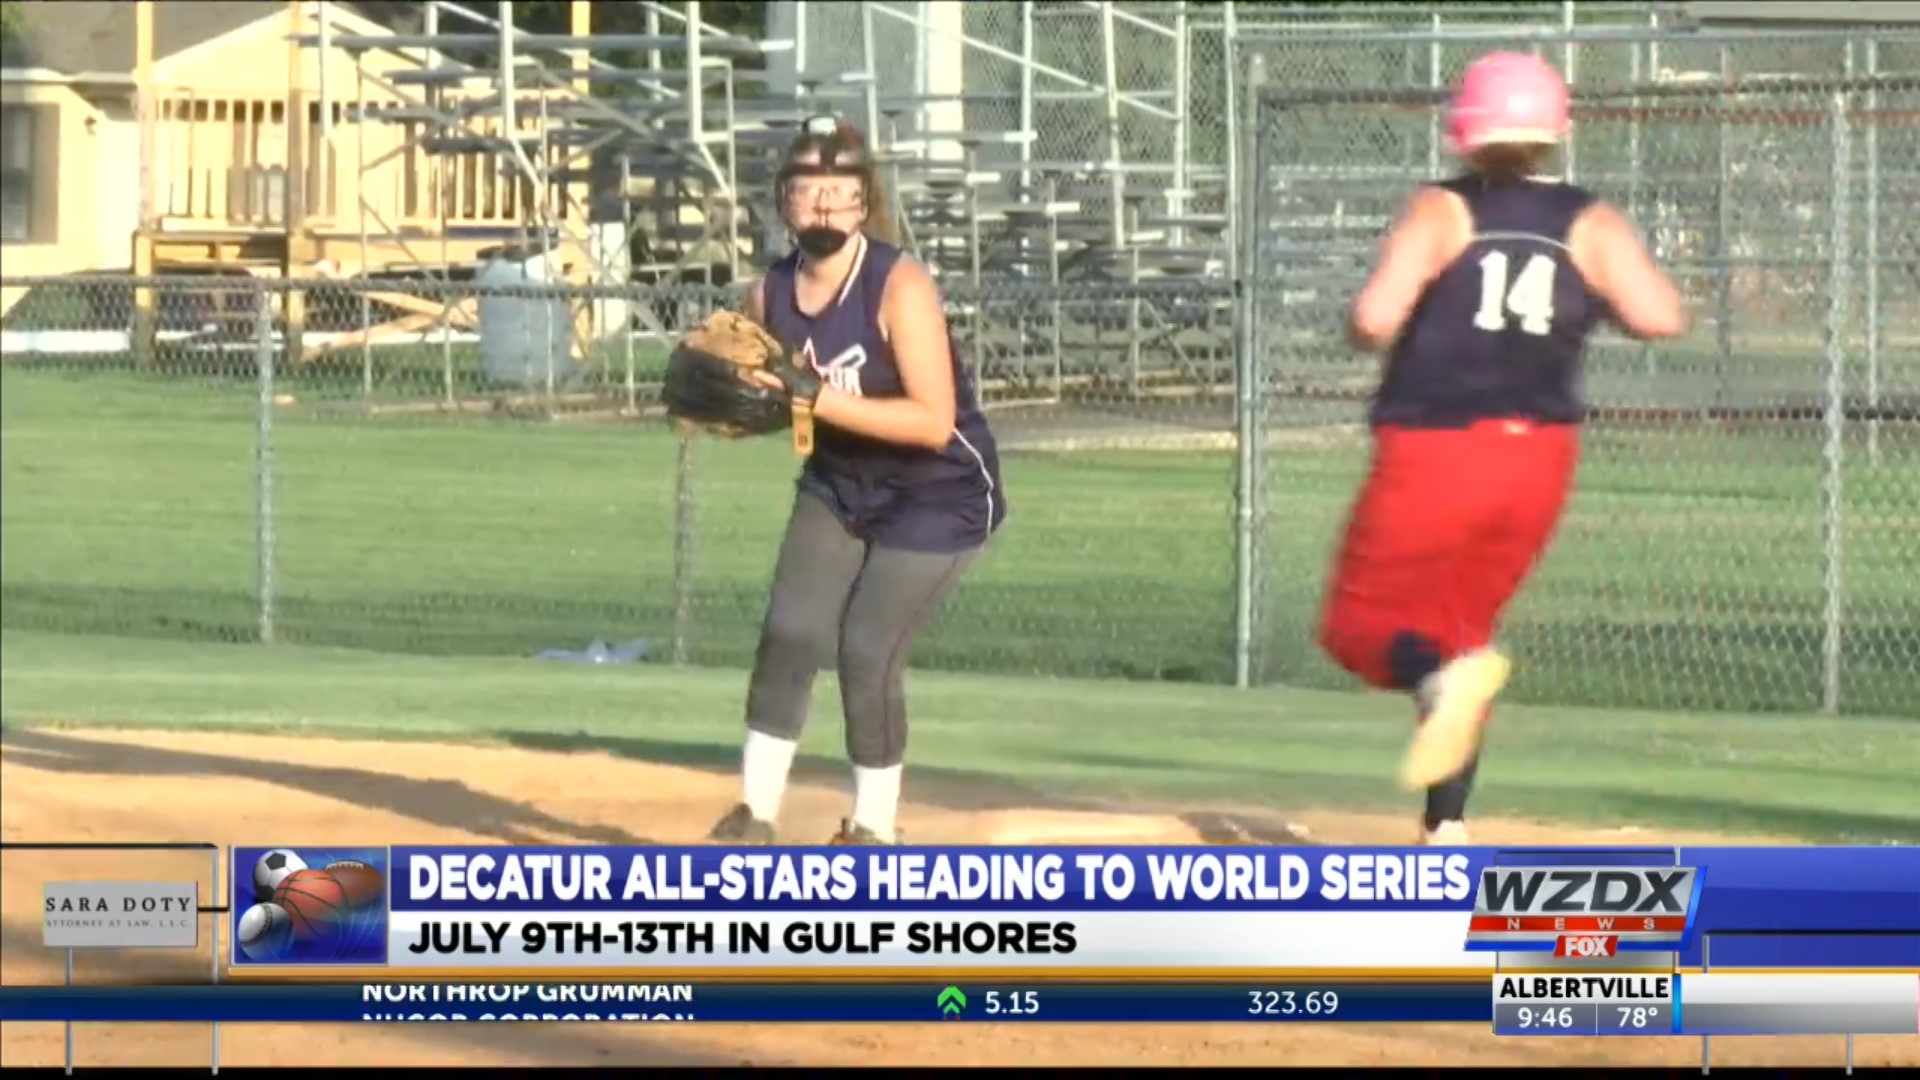 The Decatur All-Stars 15U softball team has been dominating the field in this year's rec league and now they're gearing up for the World Series.